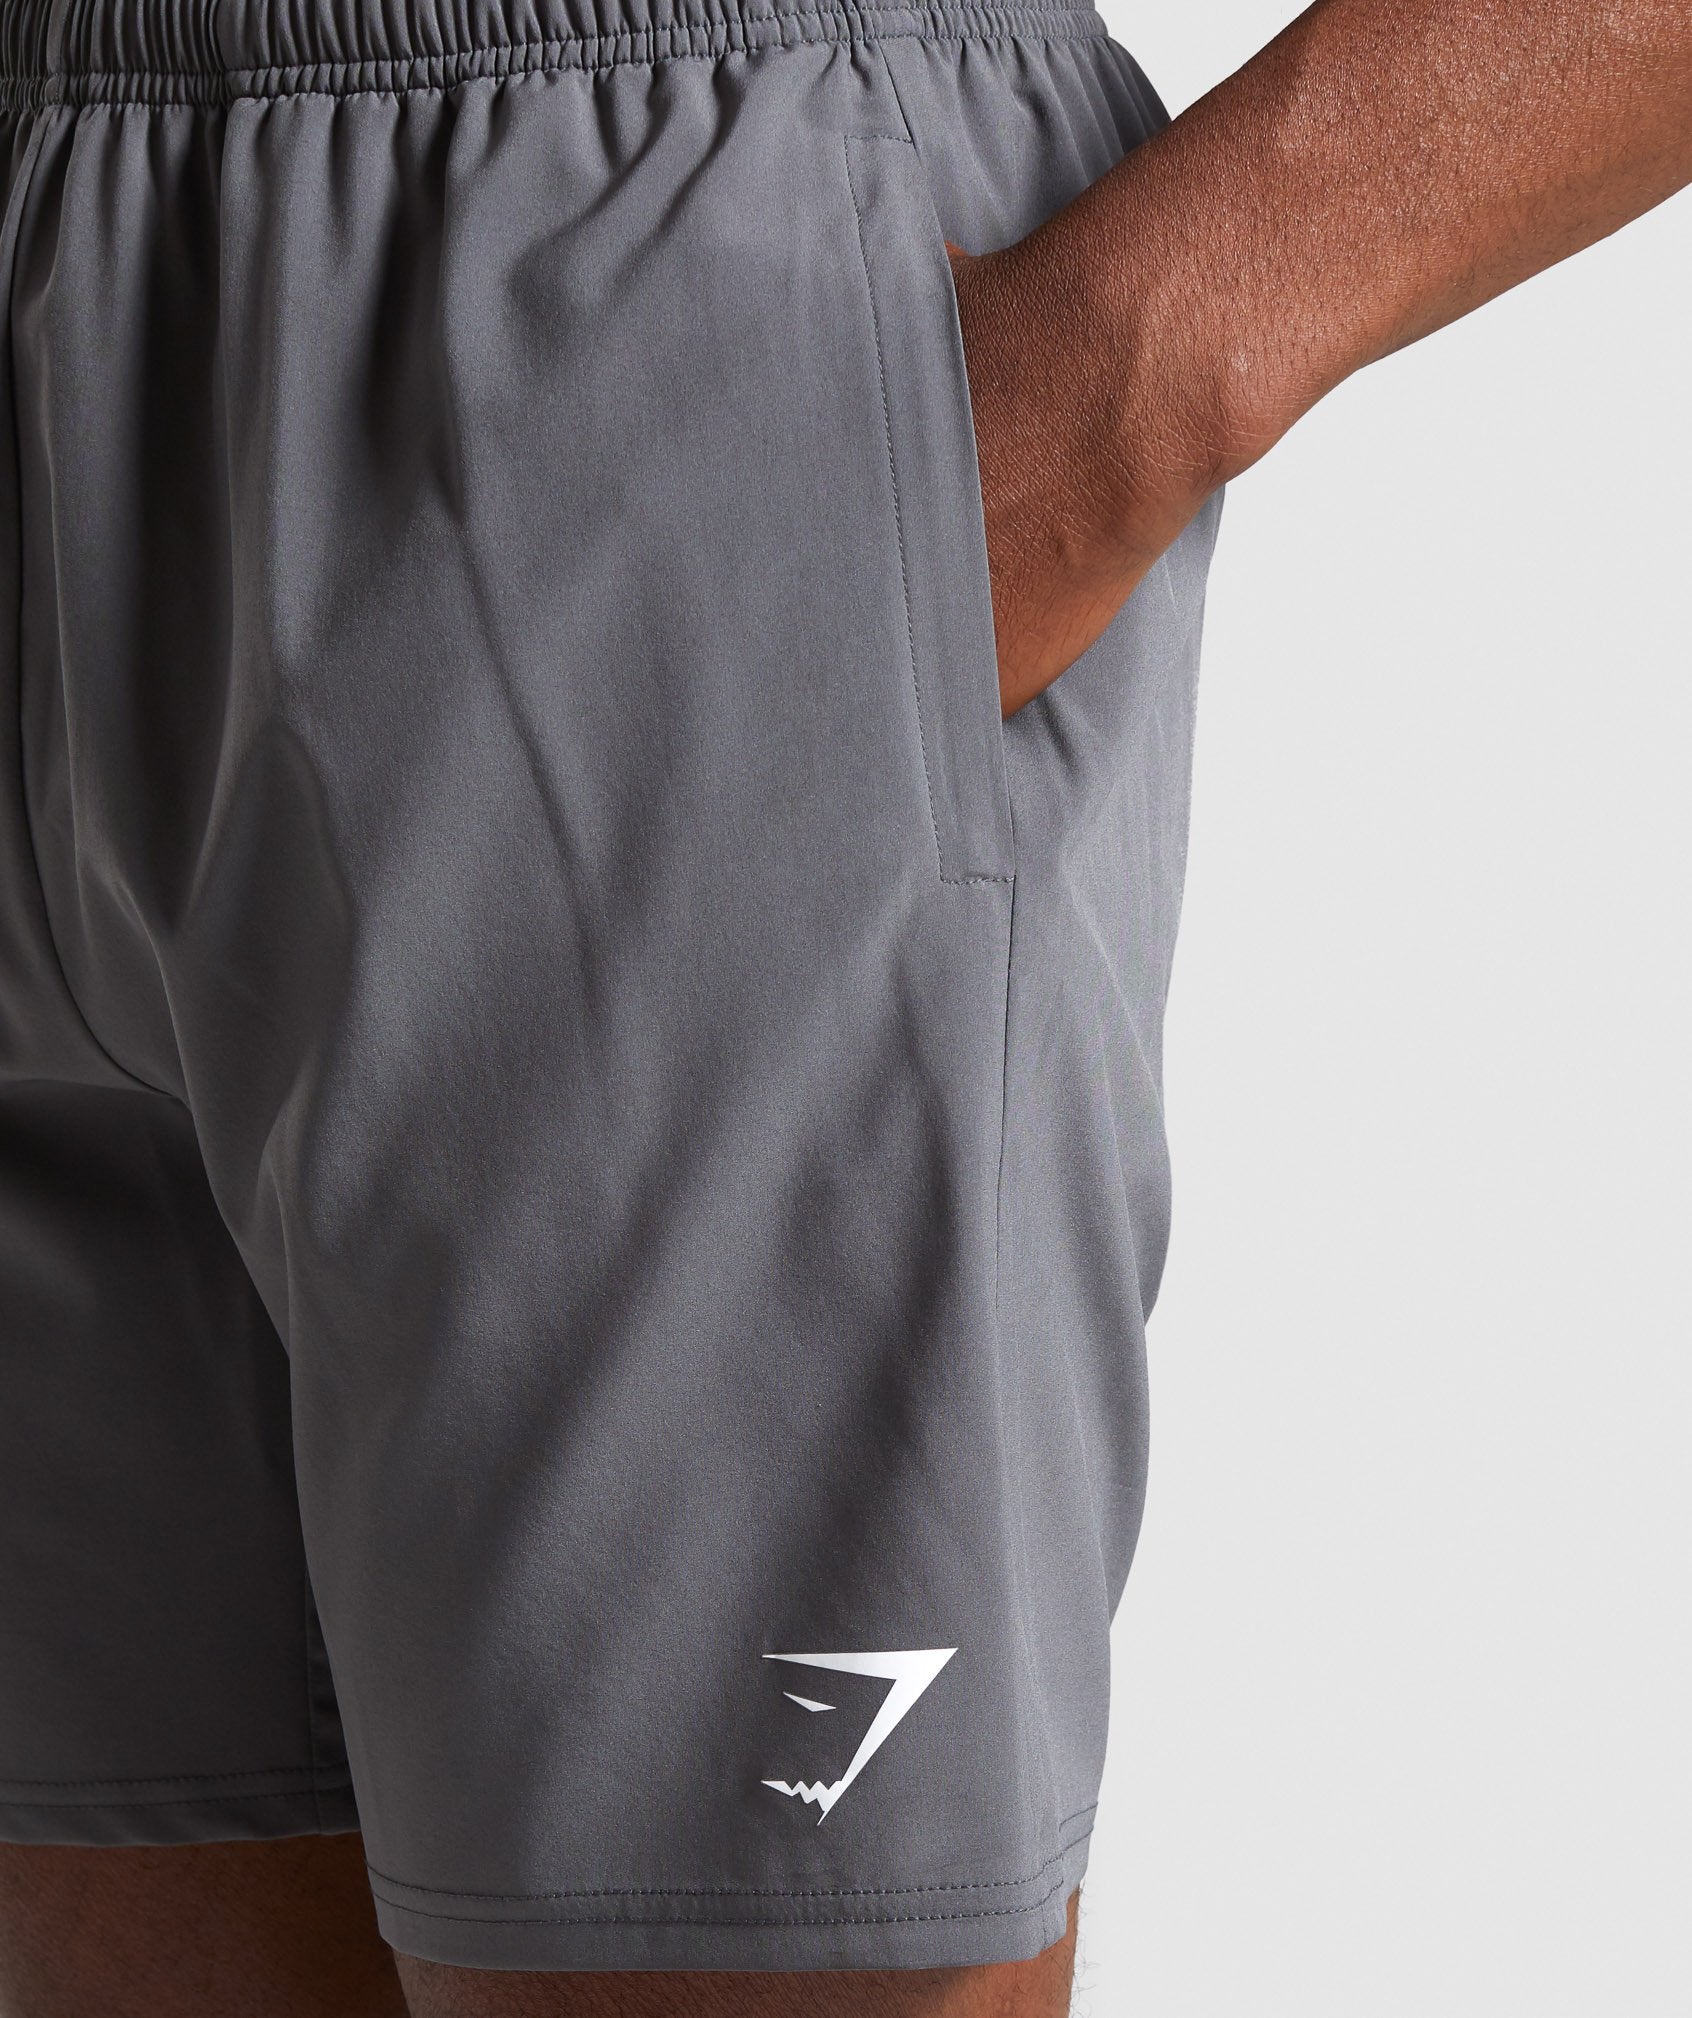 Arrival Zip Pocket Shorts in Charcoal - view 5